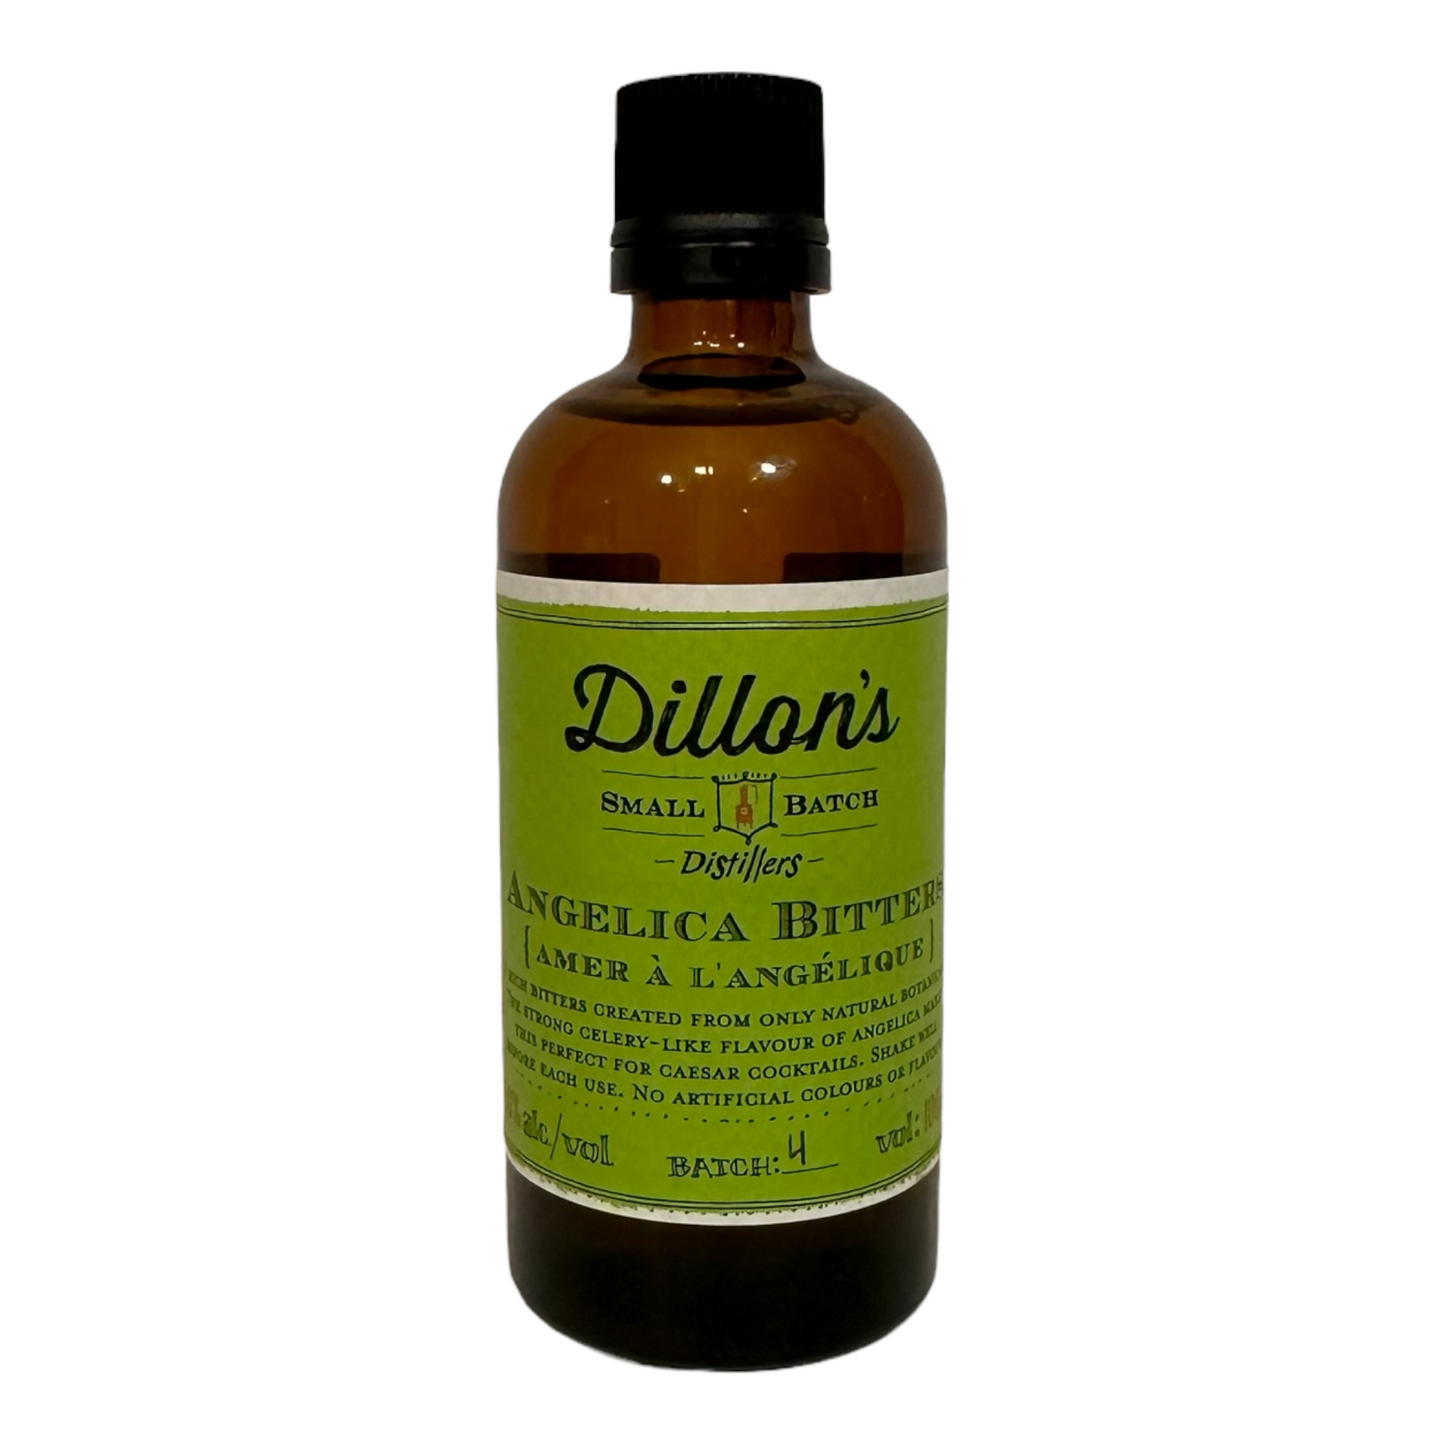 DILLON'S ANGELICA BITTERS